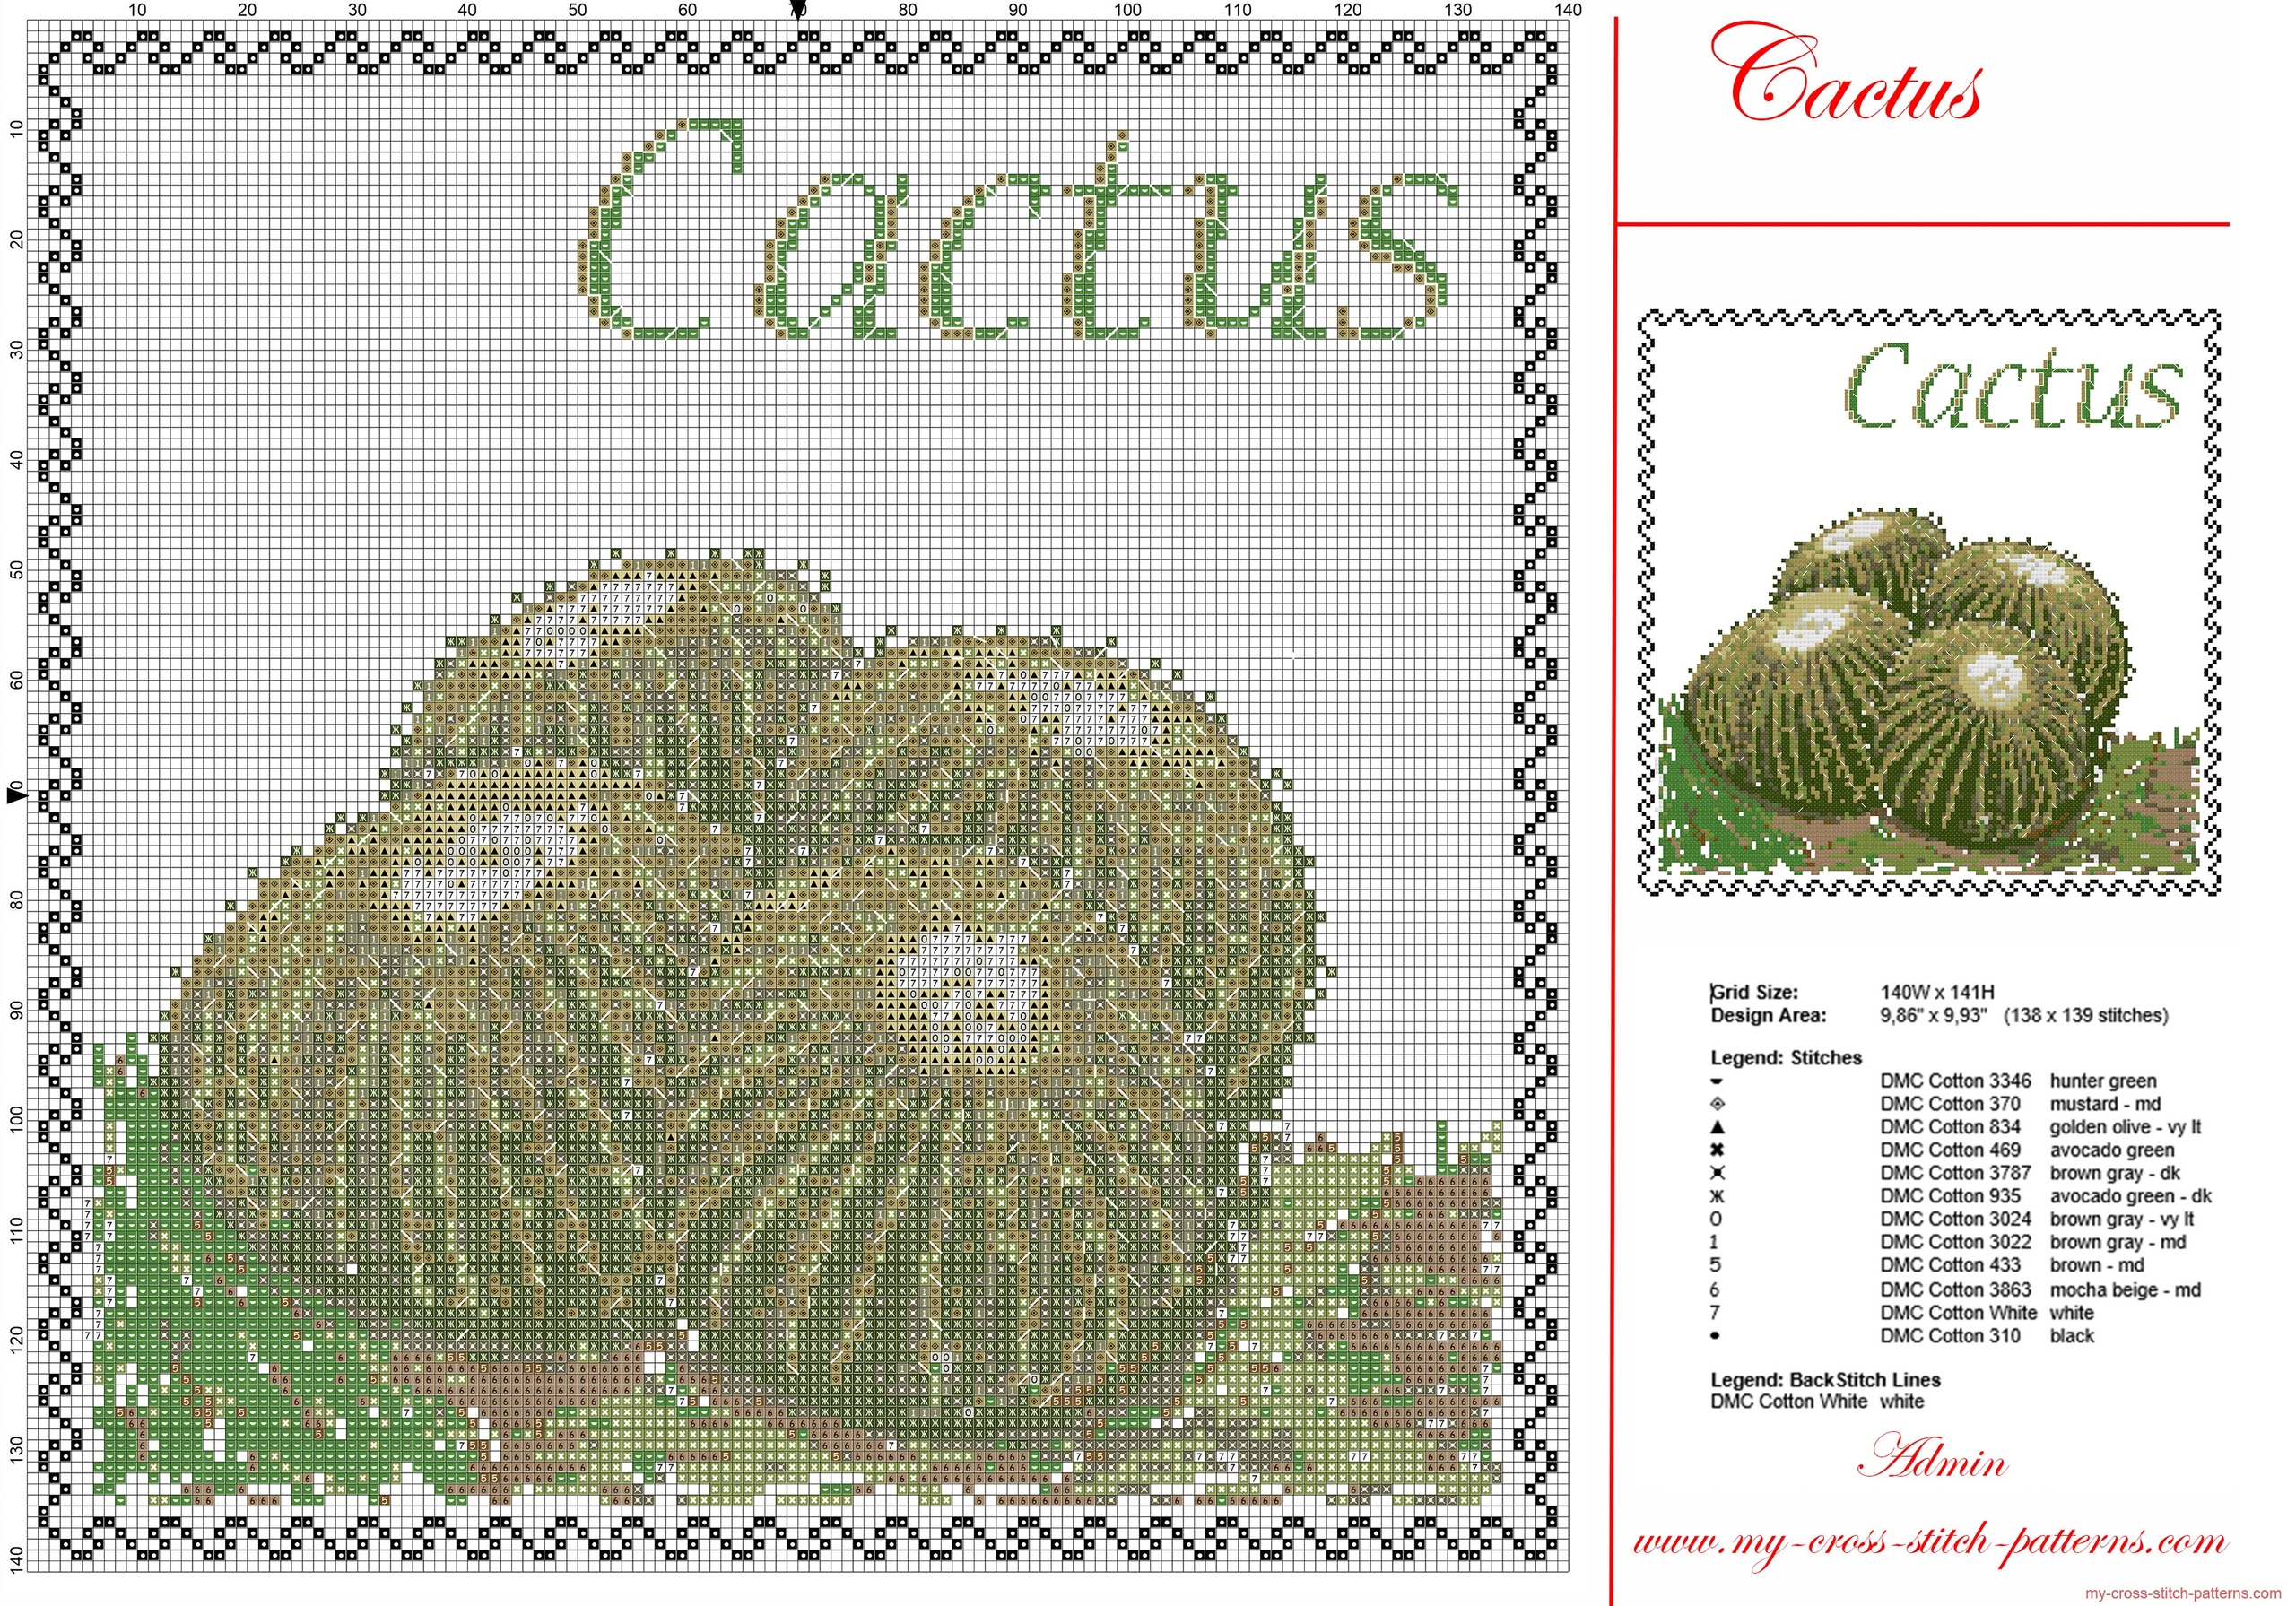 cross_stitch_painting_with_succulent_cactus_pcstitch_free_pattern